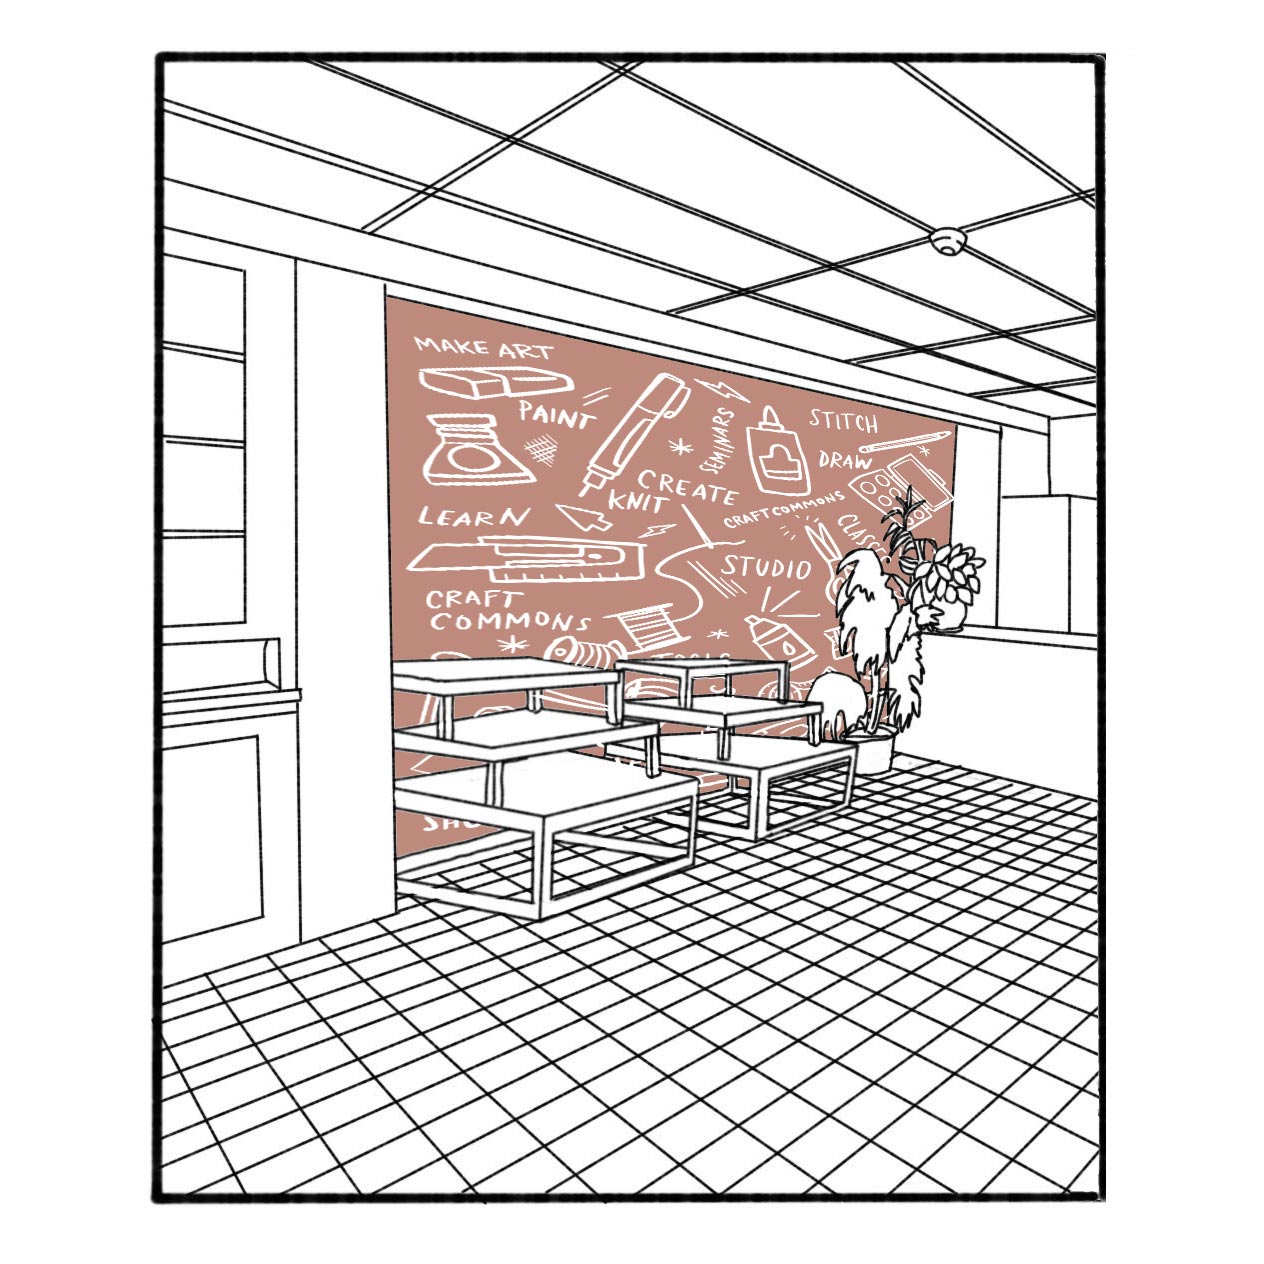 Illustrated mockup of the interior of Craft Commons